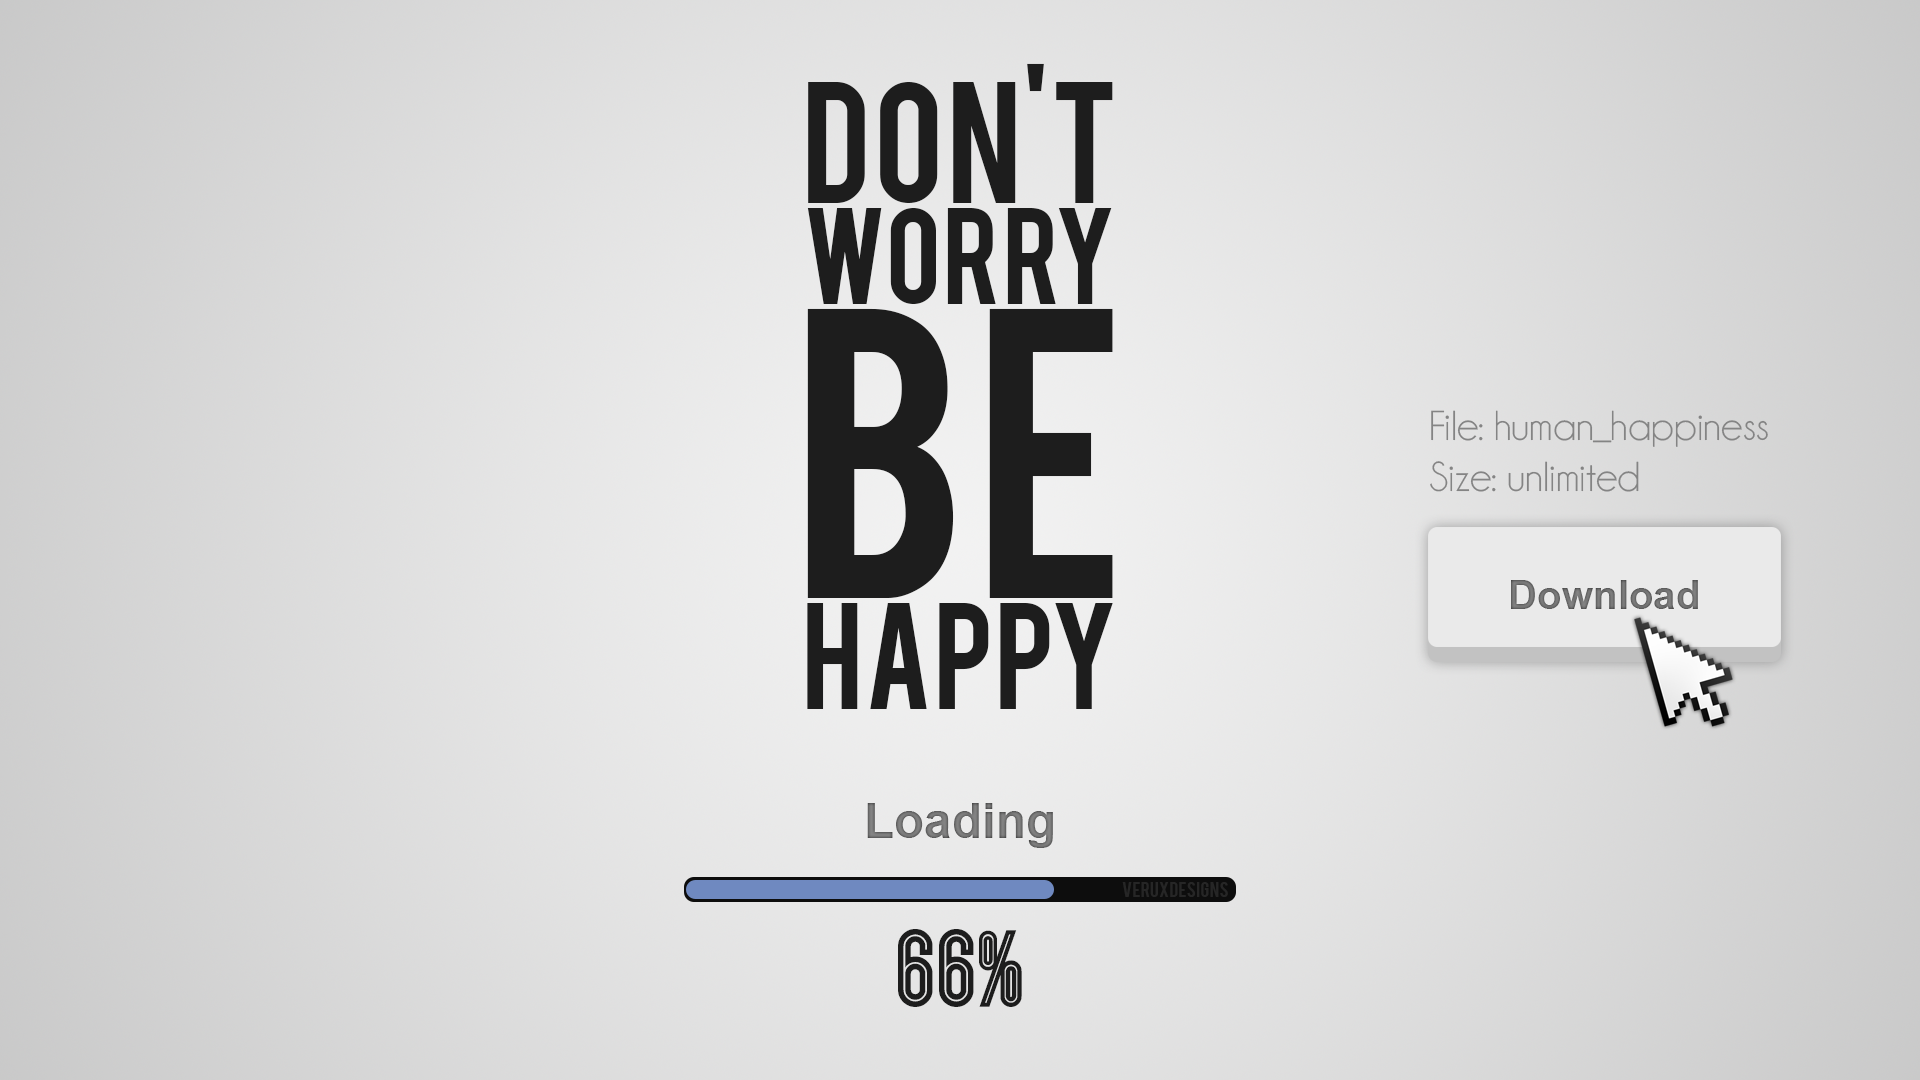 Don t worry dont. Dont worry by Happy обои. Don't worry be Happy обои. Don`t worry be Happy заставка. Don't worry be Happy картинки.